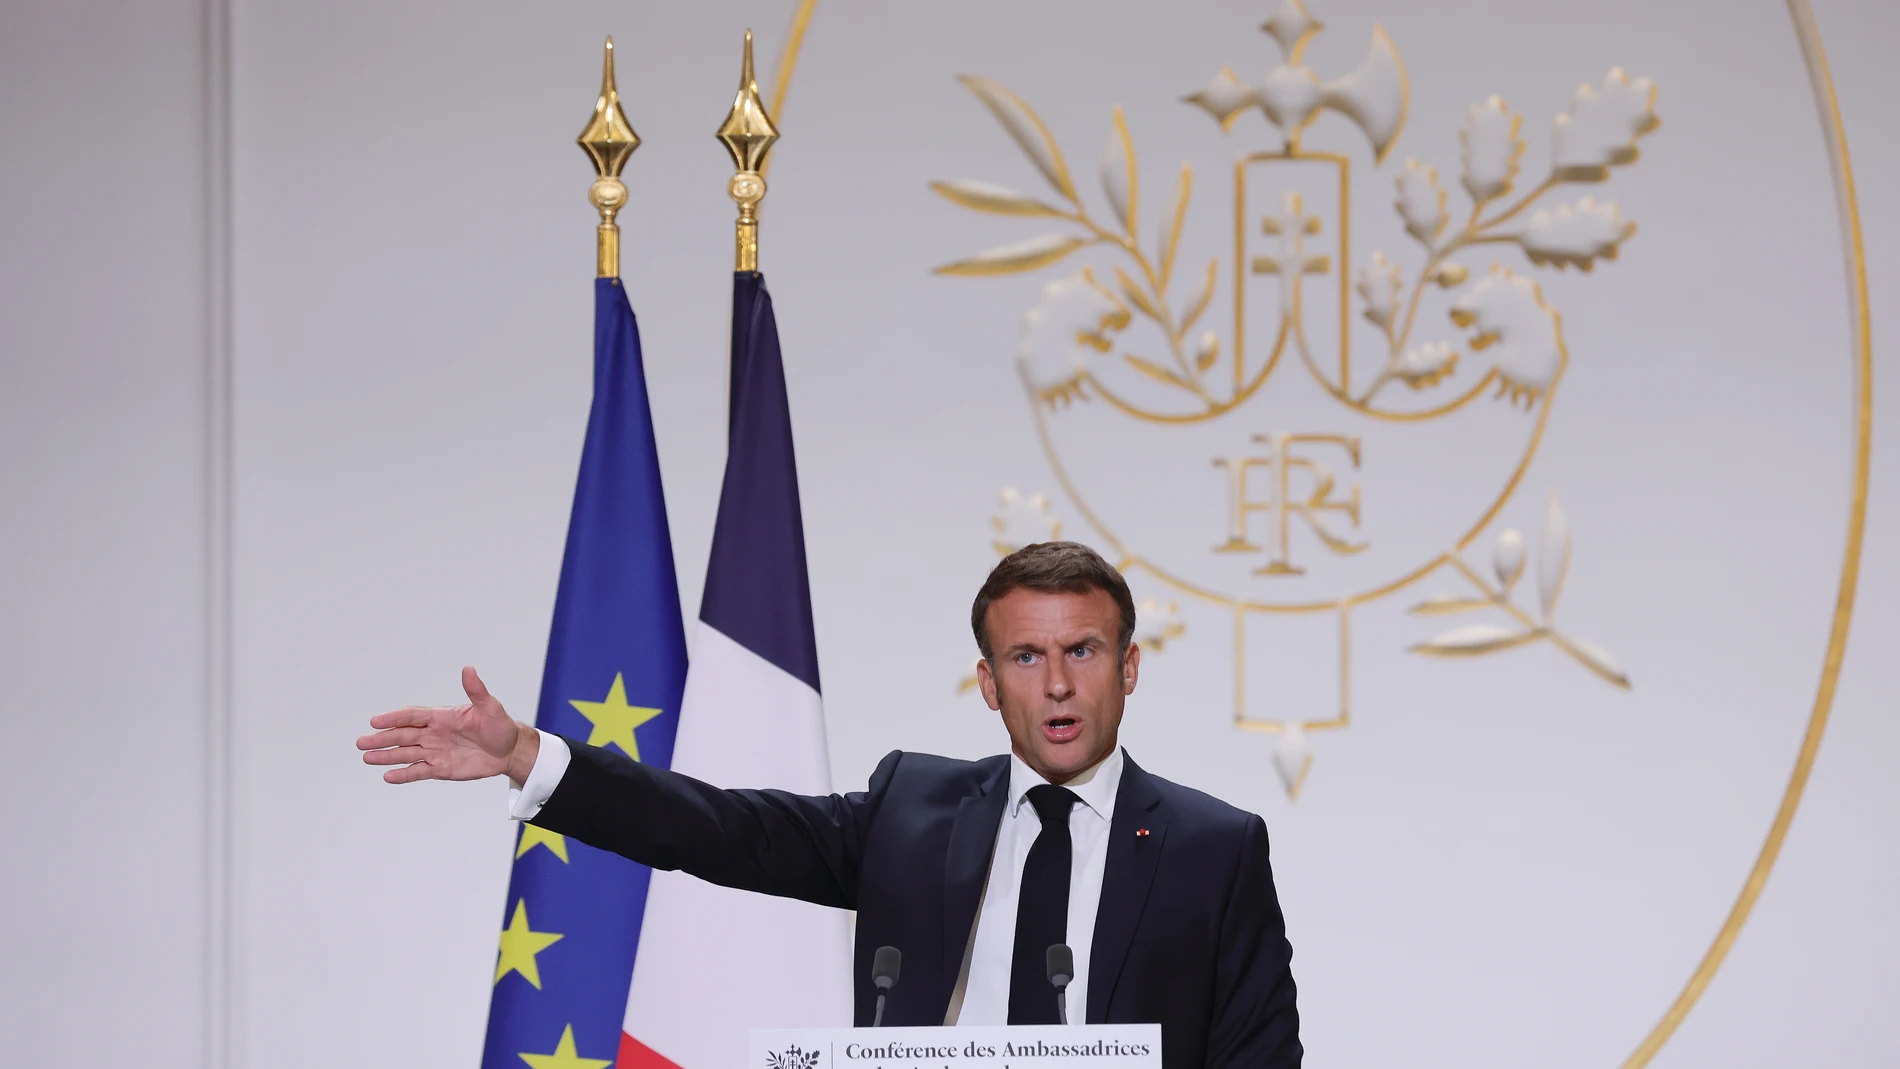 Paris (France), 28/08/2023.- French President Emmanuel Macron speaks in front of French ambassadors during the conference of ambassadors at the Elysee Palace, Paris, France, 28 August 2023. Macron is expected to highlight France's foreign policy during the annual ambassadors' conference. (Francia) EFE/EPA/TERESA SUAREZ / POOL 